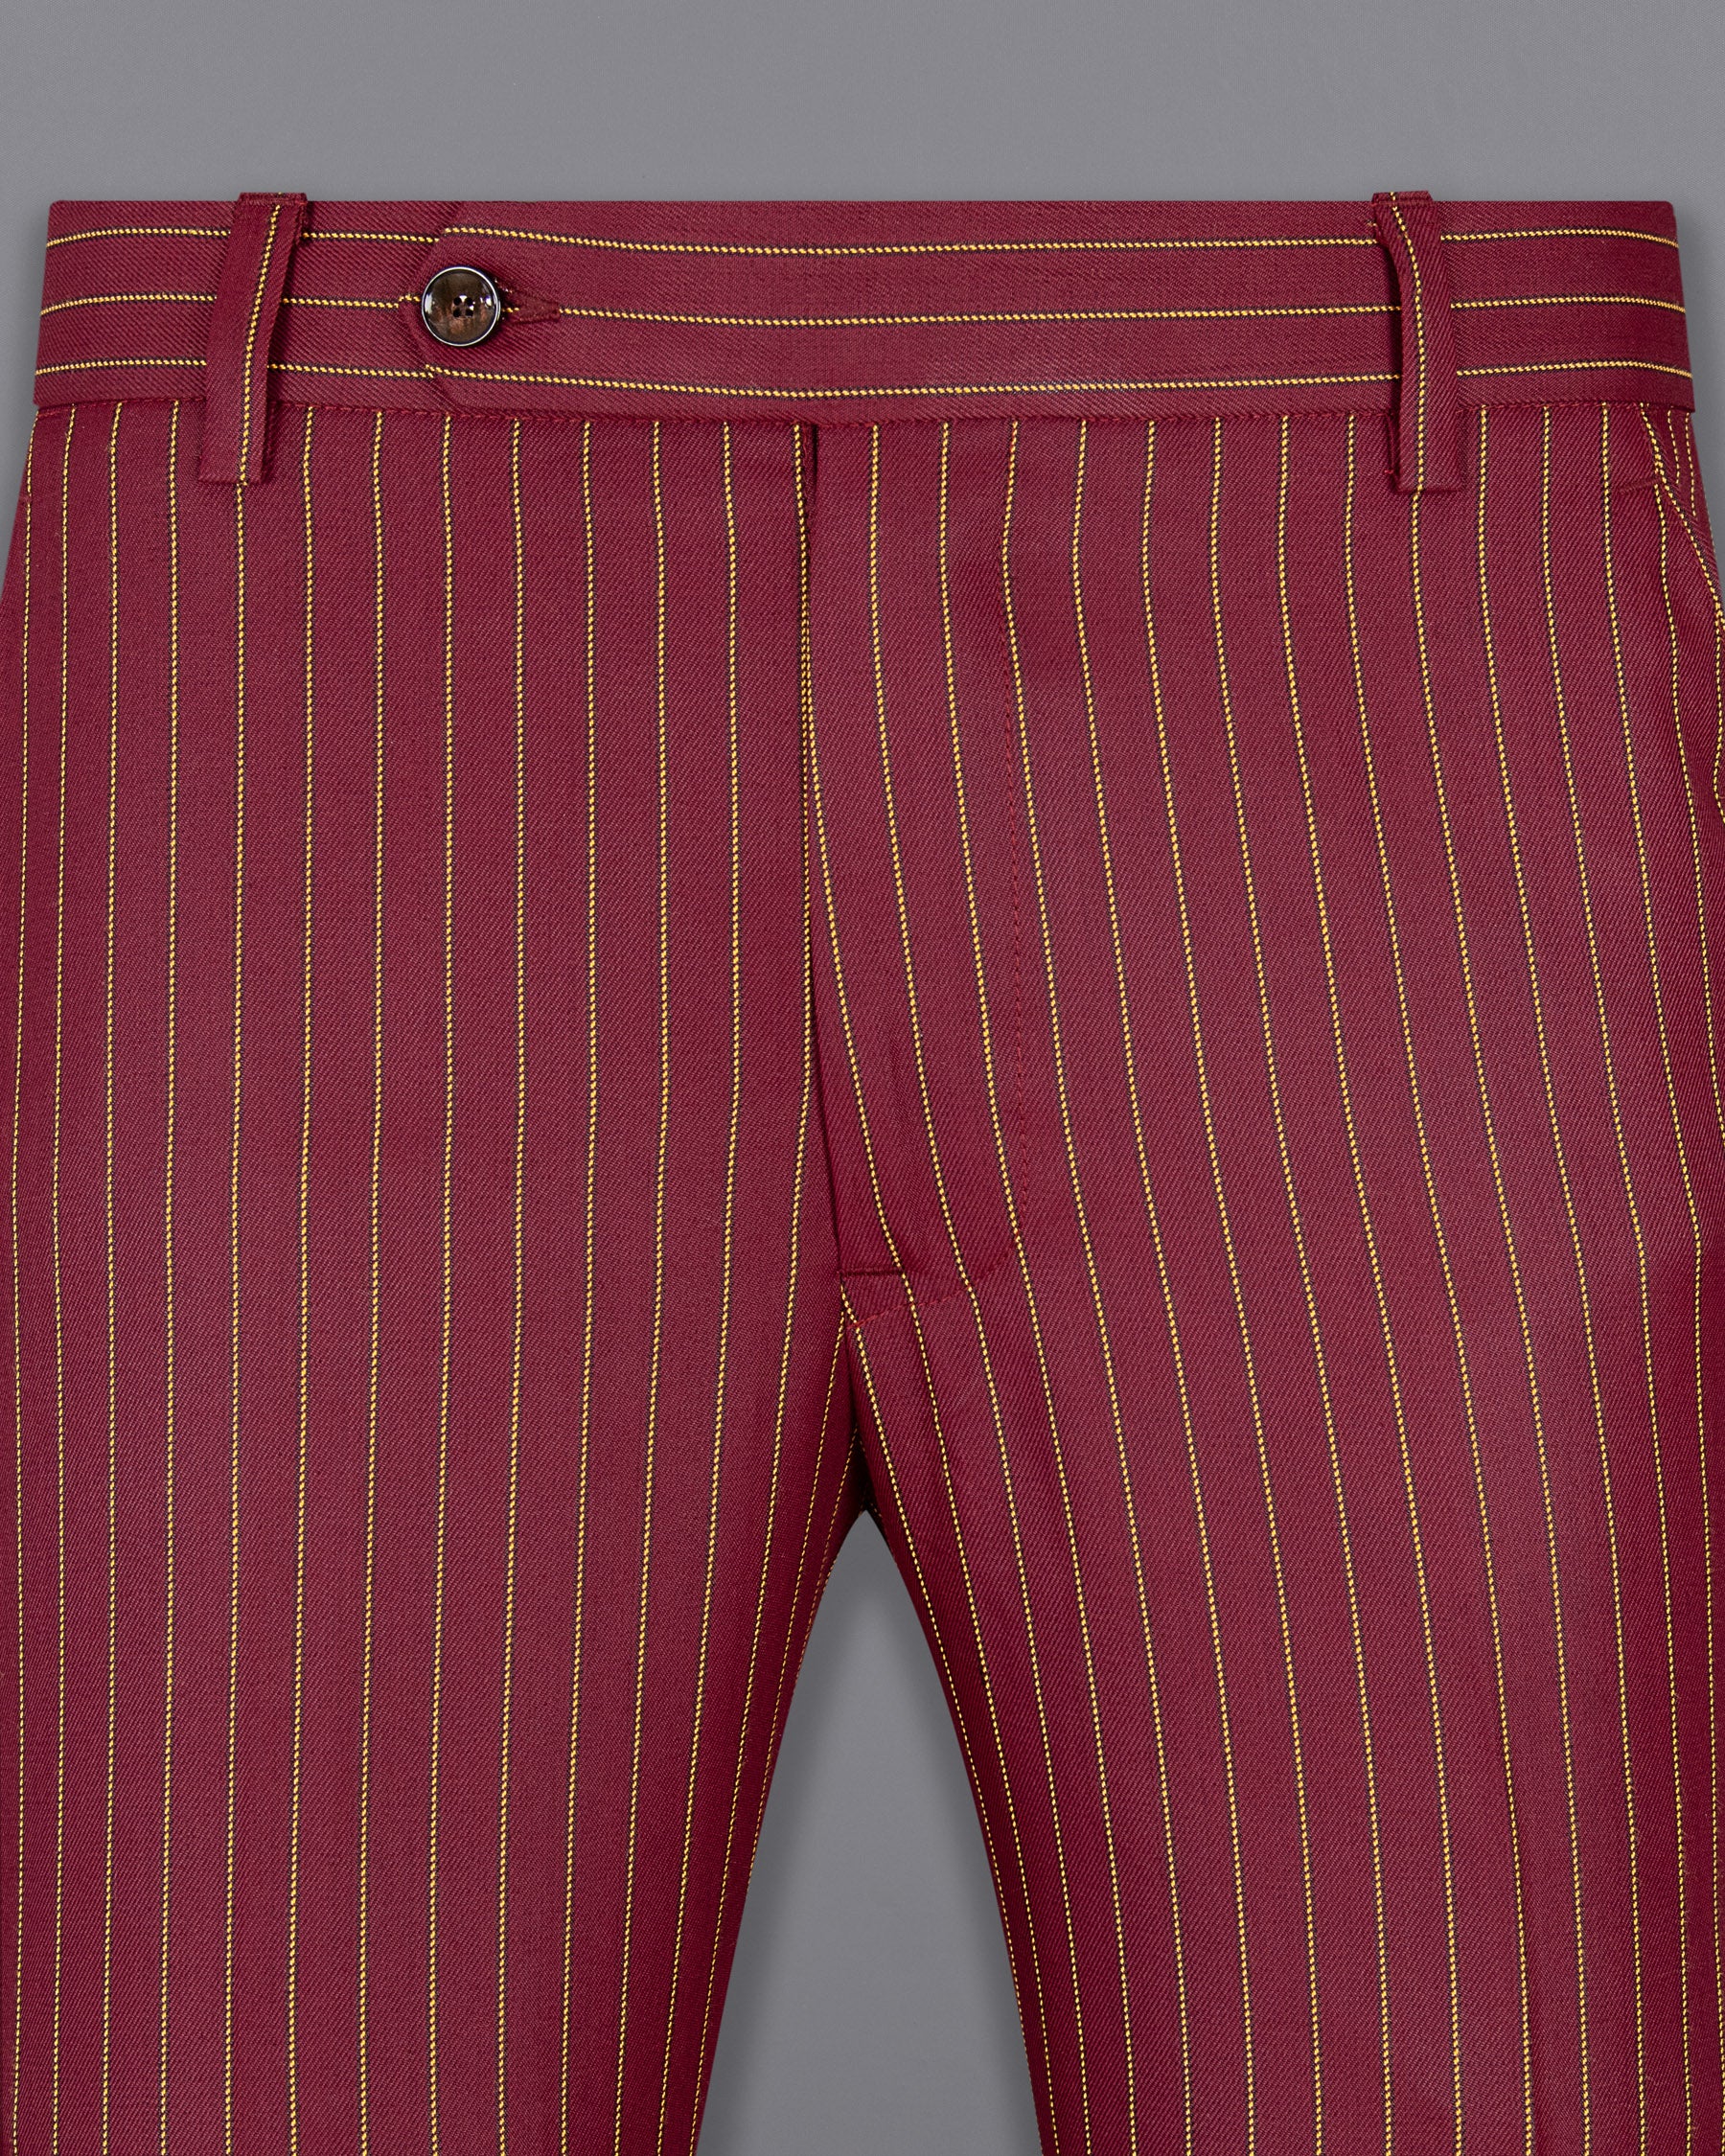 Tosca Red with Cream Can Yellow Striped Woolrich Pant T1290-28, T1290-30, T1290-32, T1290-36, T1290-34, T1290-38, T1290-40, T1290-42, T1290-44